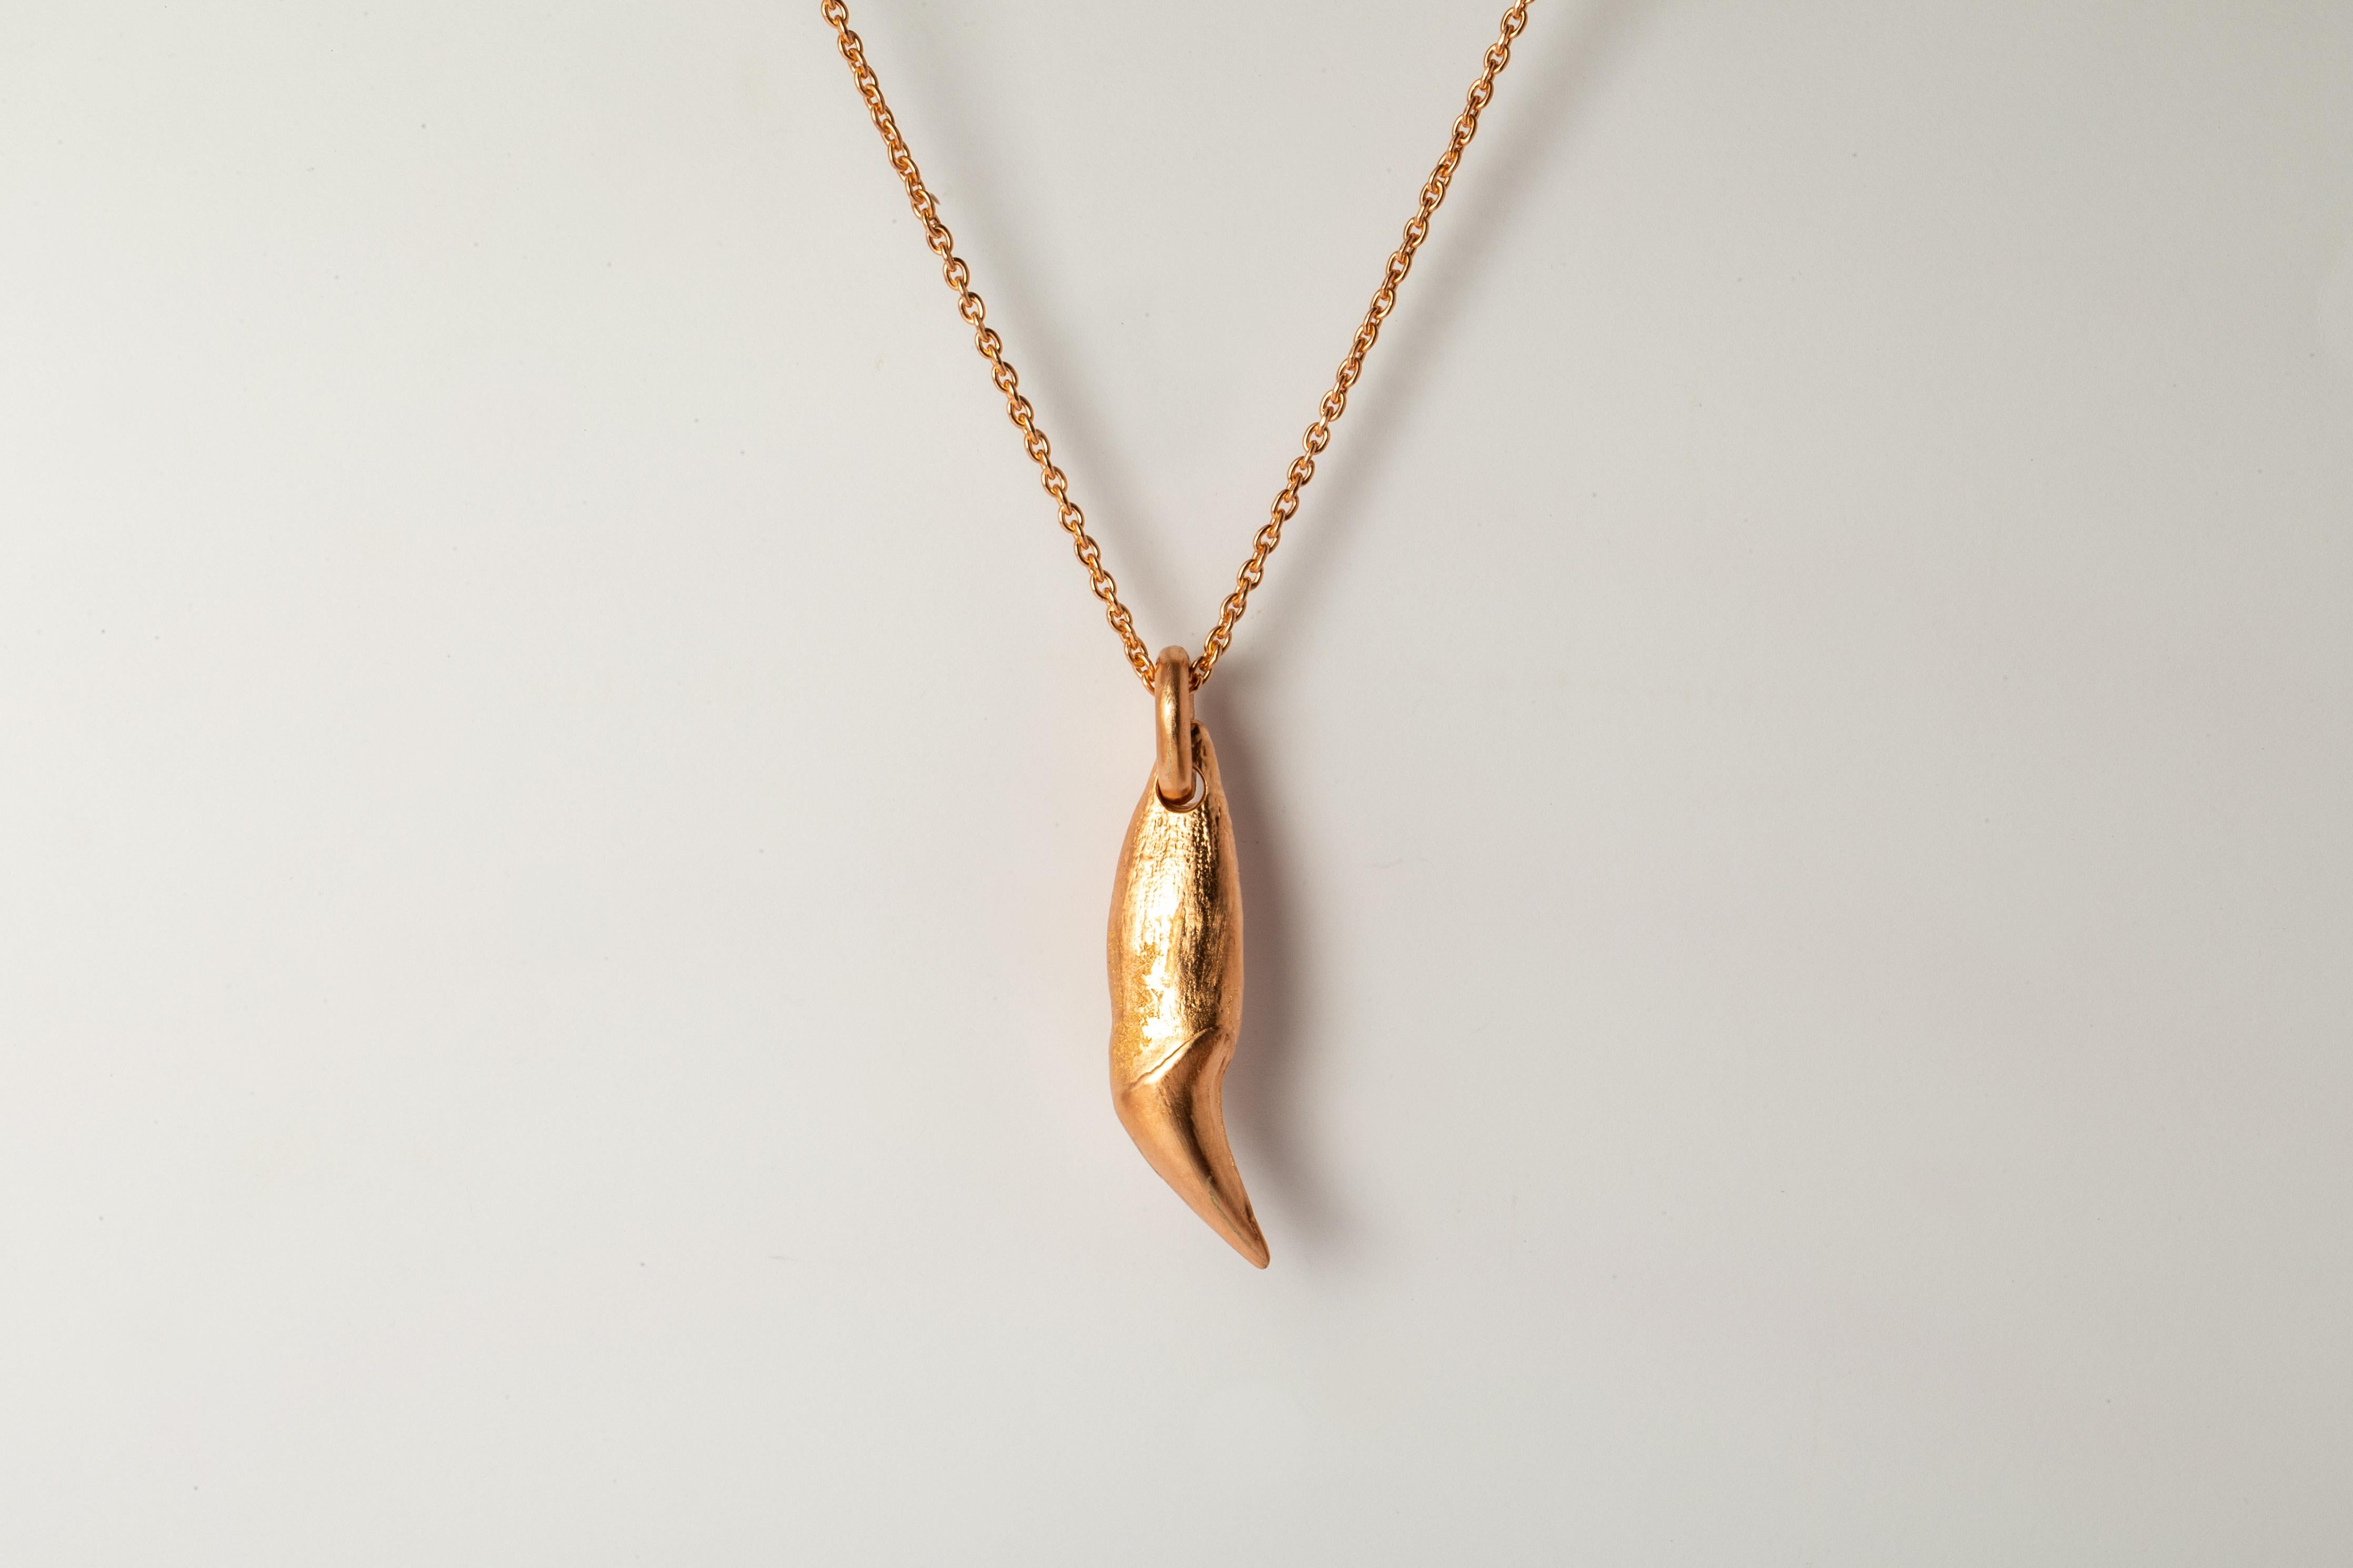 Pendant necklace in the shape of a bear tooth in brass, it comes on a 74cm sterling silver chain. Brass and sterling silver substrates are electroplated with 18k Rose Gold and then dipped into acid to create the subtly destroyed surface. This item